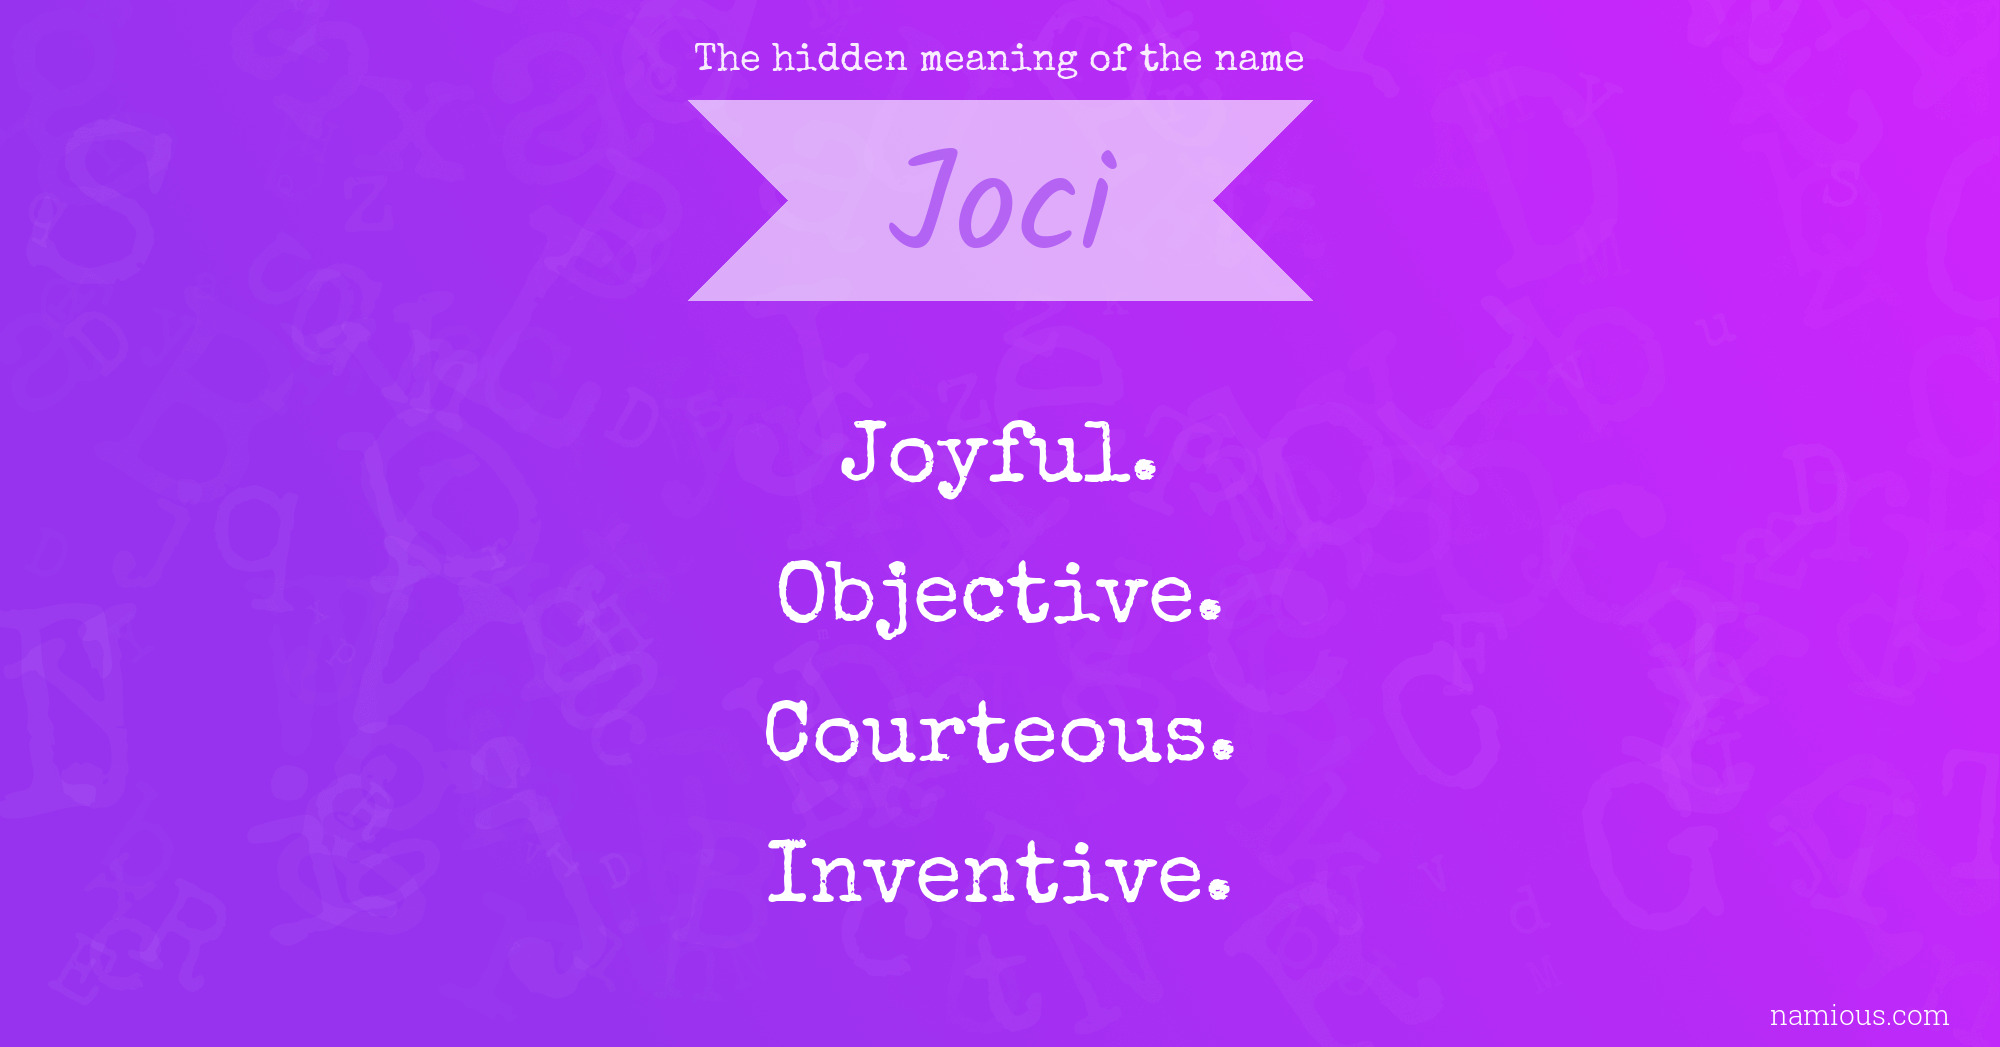 The hidden meaning of the name Joci